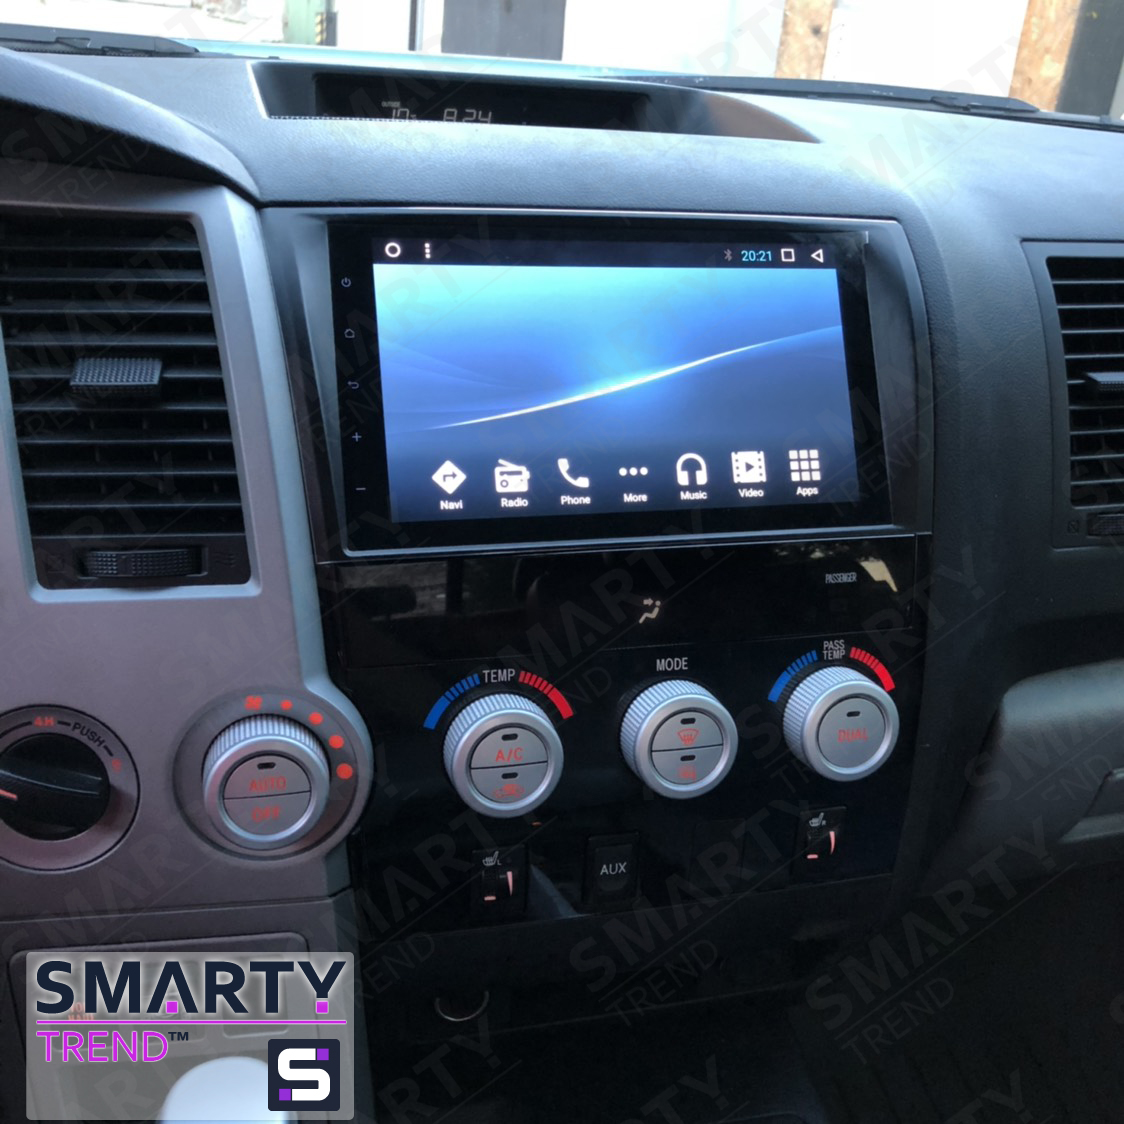 SMARTY Trend head unit for Toyota Tundra 